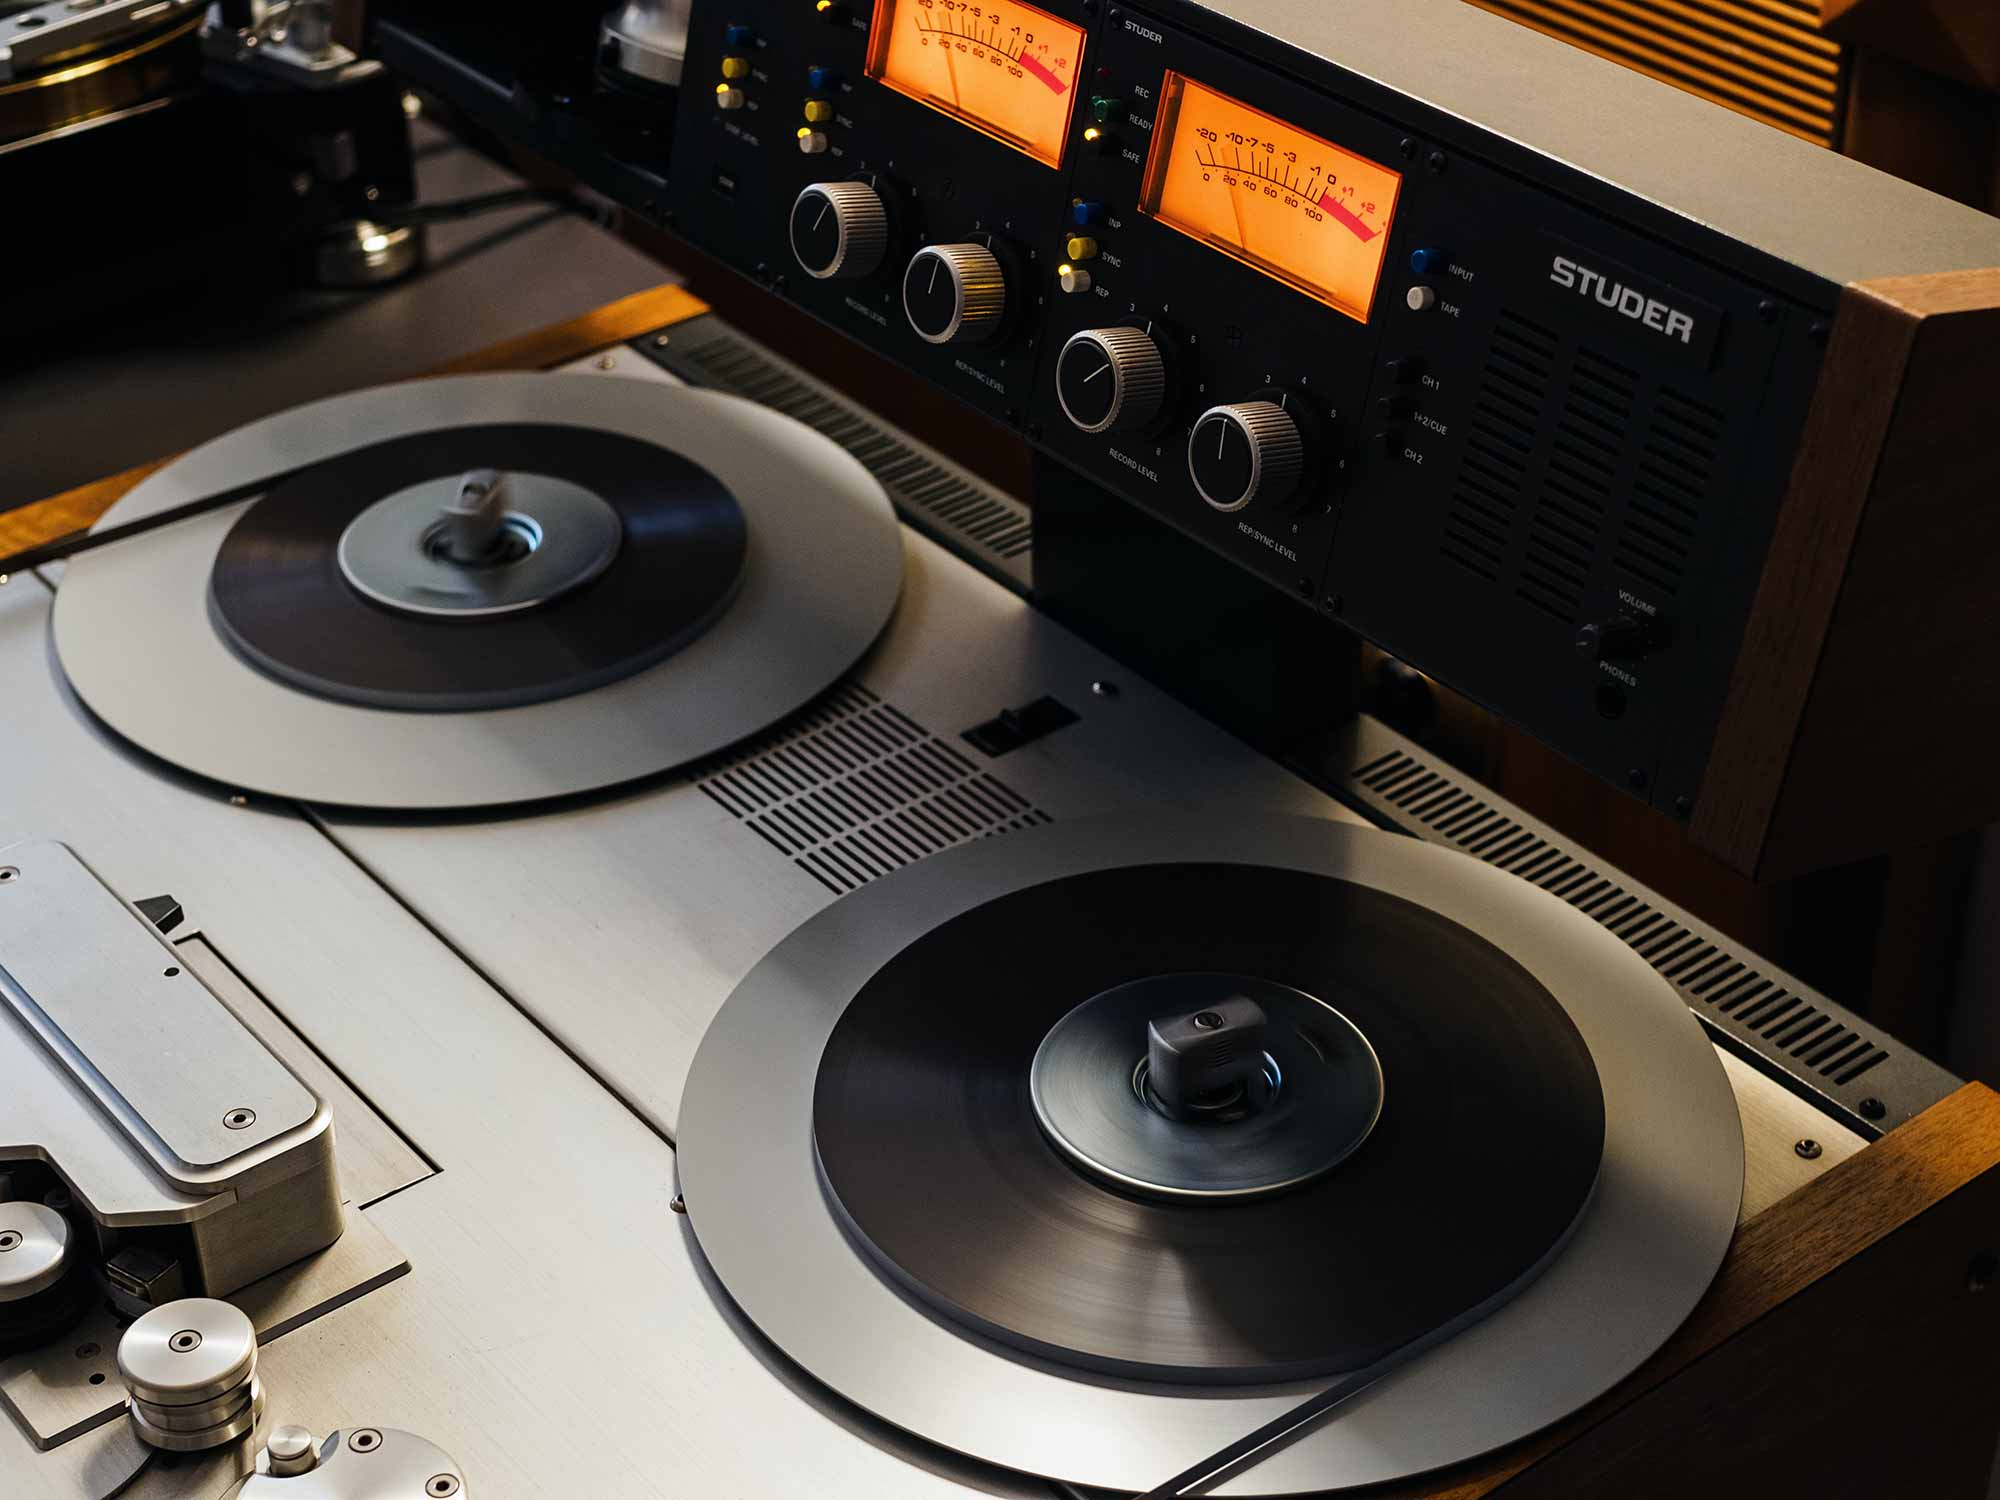 Reel to Reel: Buy, Play & Optimize the Tape Experience - RX Reels